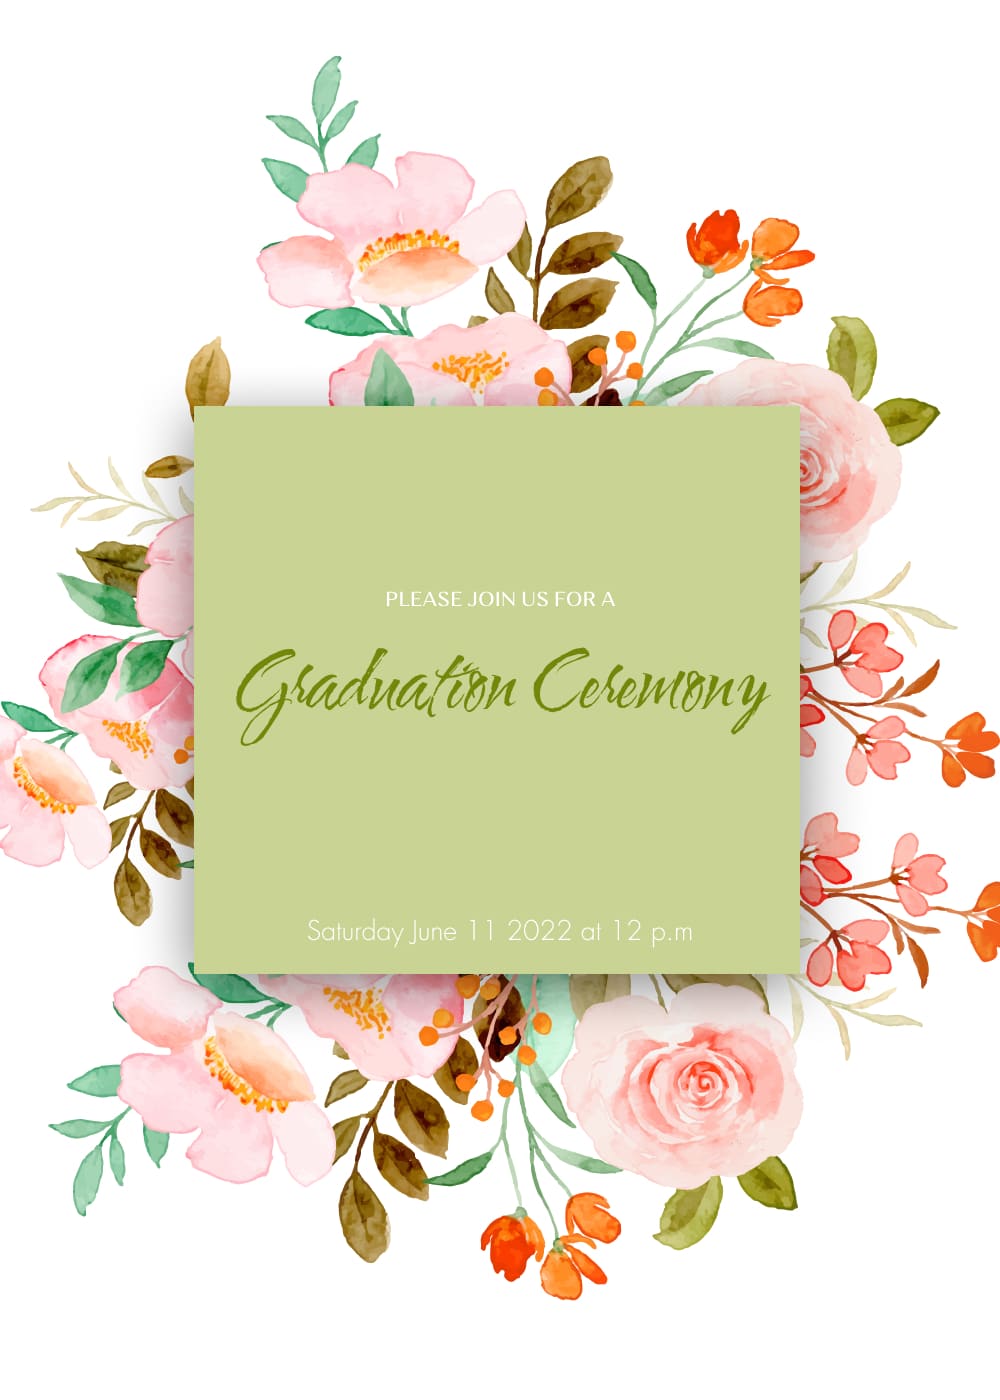 Delicate graduation ceremony invite template with flowers.